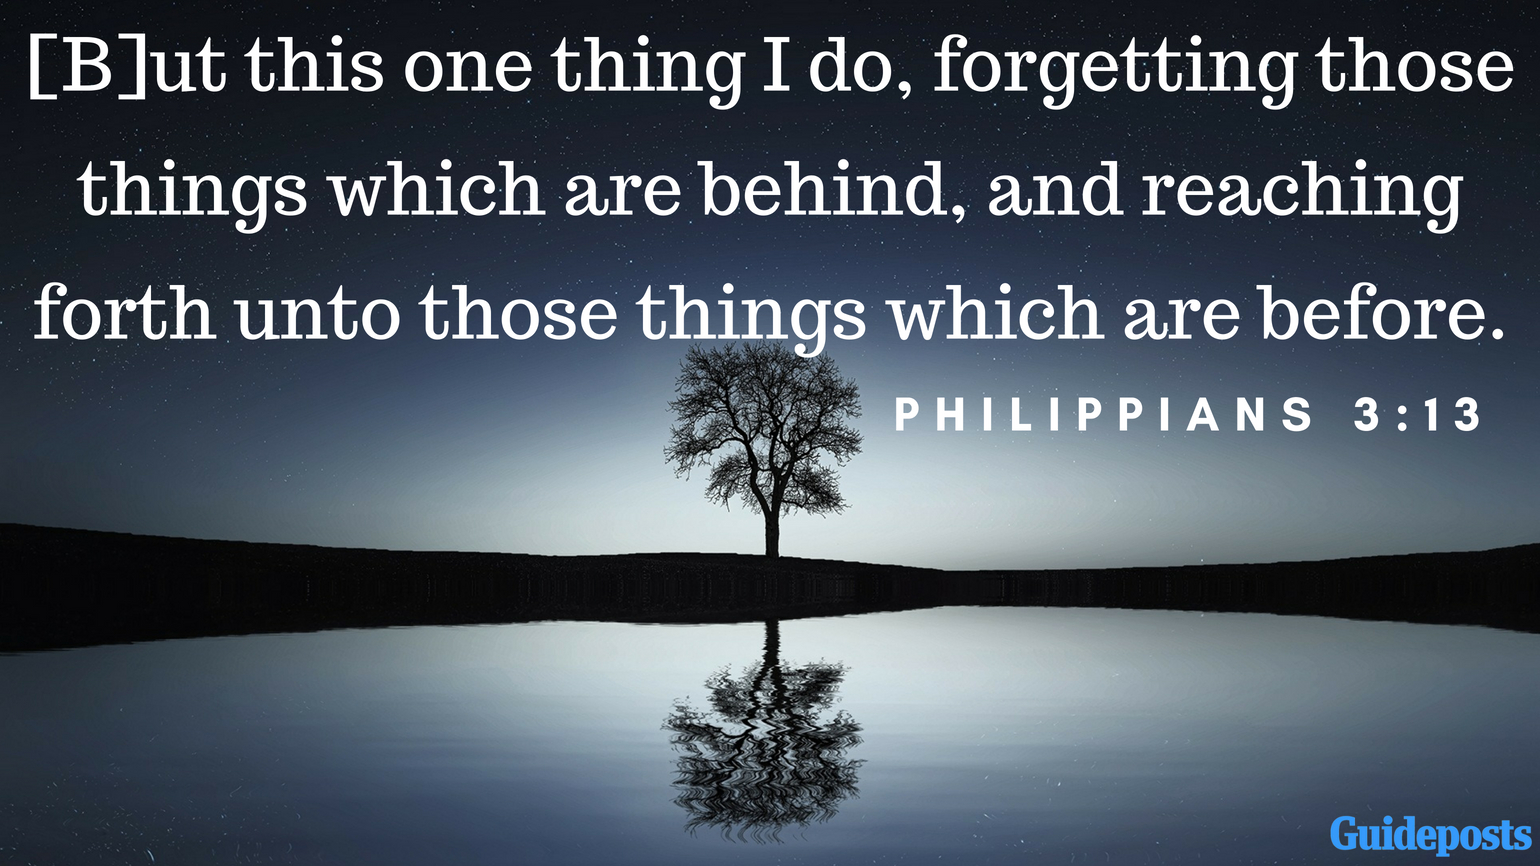 Bible Verses to Help You Forgive Yourself: [B]ut this one thing I do, forgetting those things which are behind, and reaching forth unto those things which are before. Philippians 3:13 better living life advice